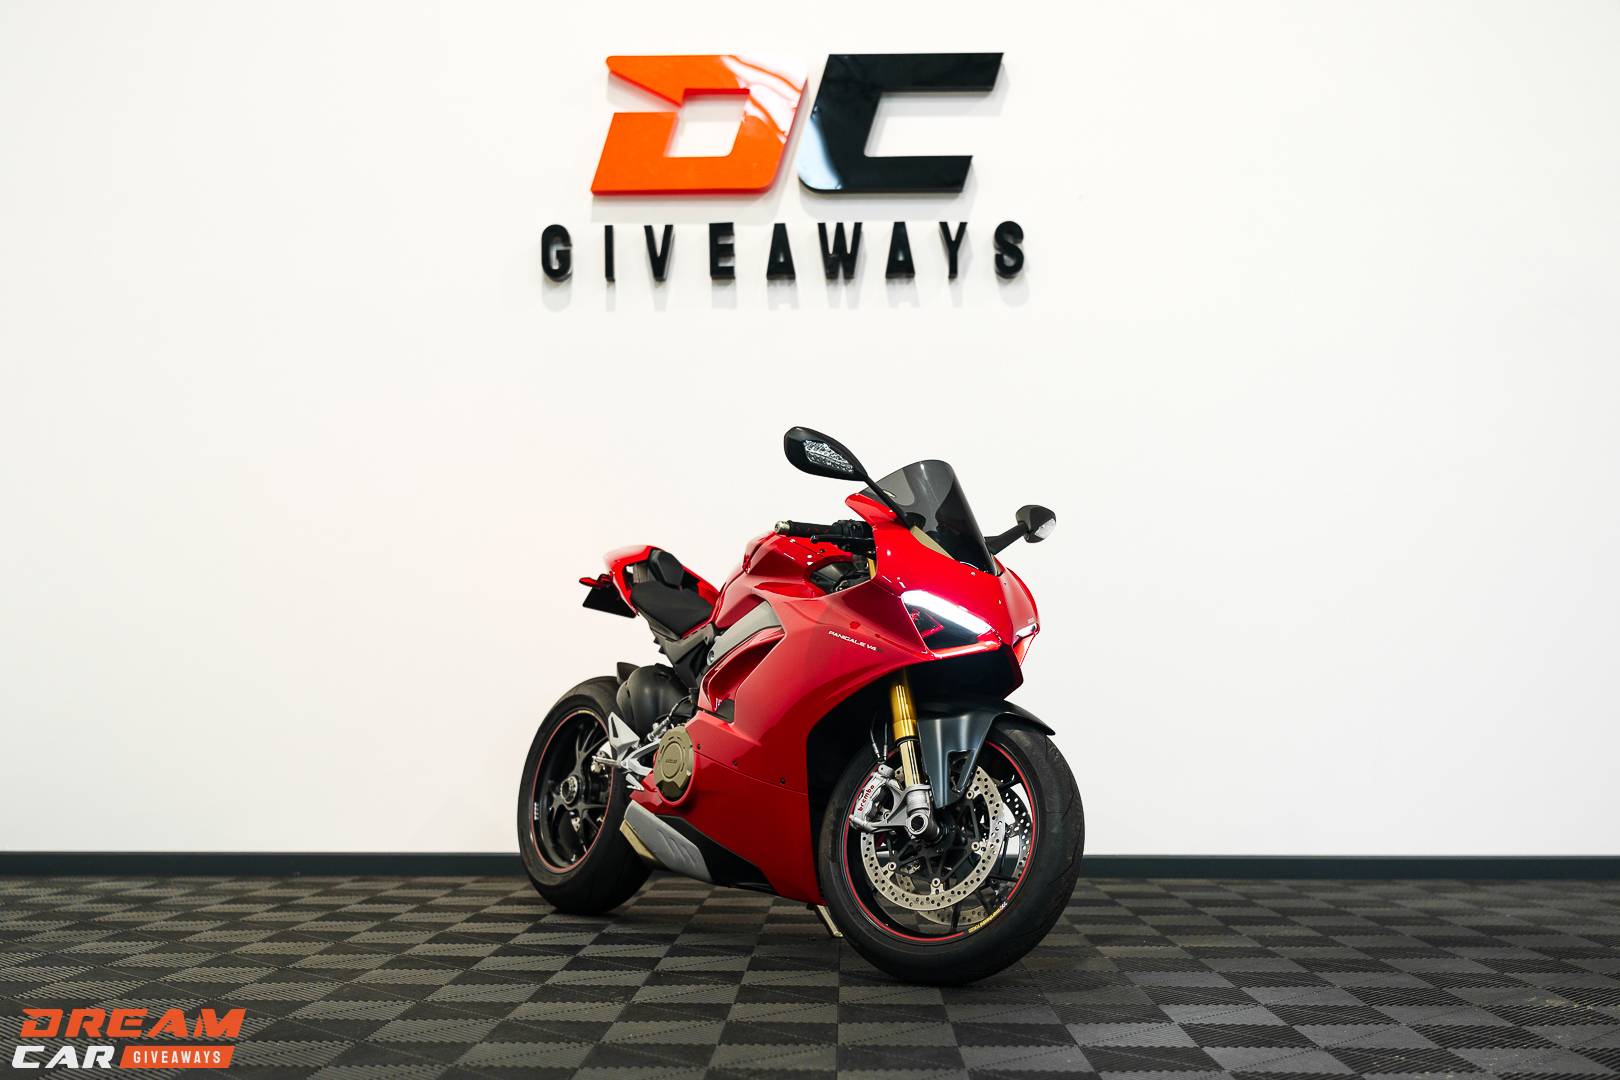 Win this Ducati V4S & £1,000 - Only 2707 Entries